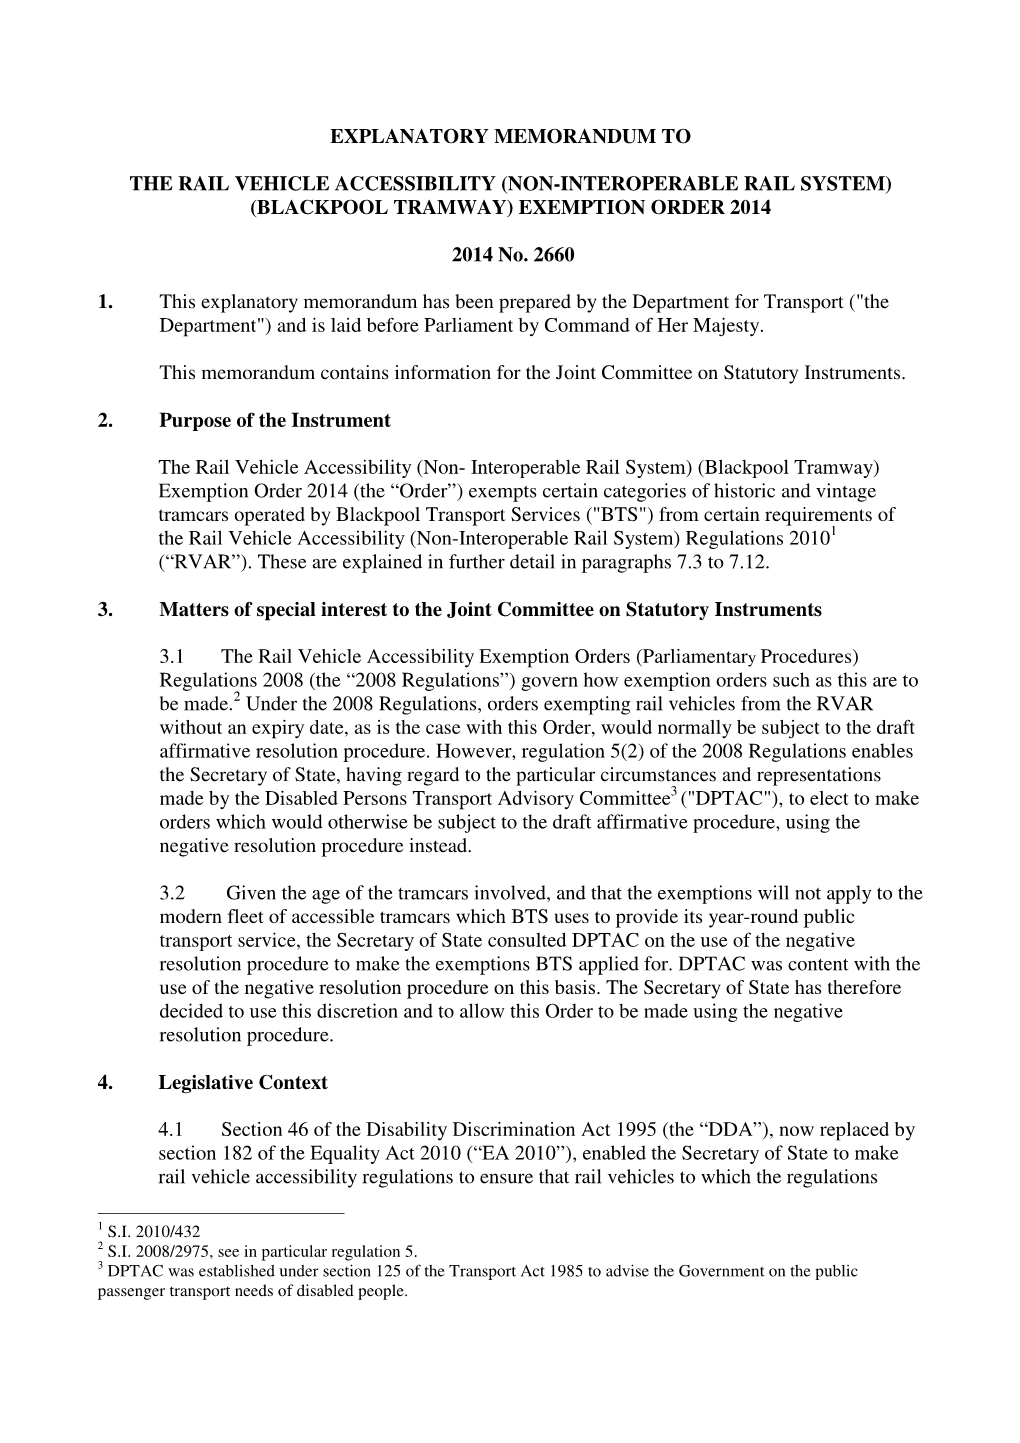 Blackpool Tramway) Exemption Order 2014